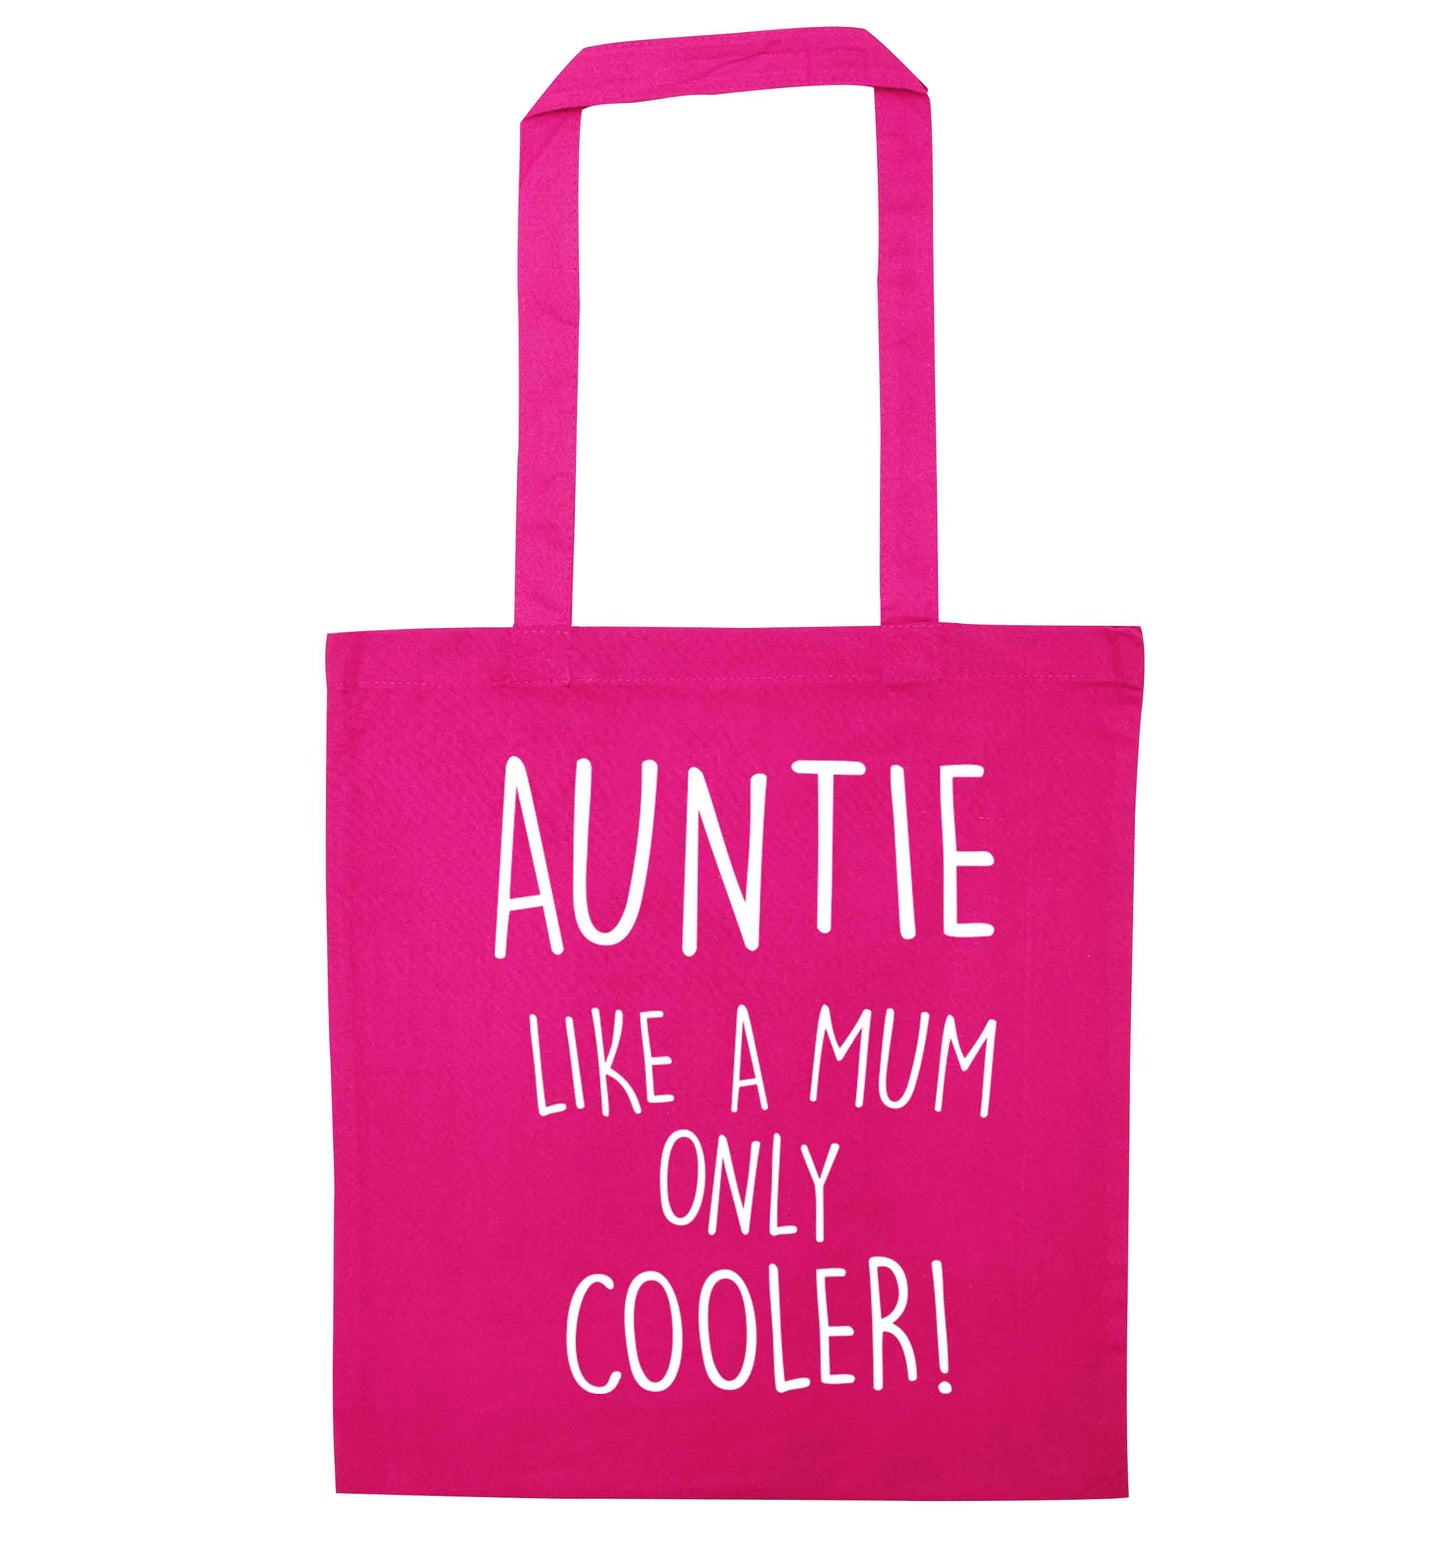 Auntie like a mum only cooler pink tote bag